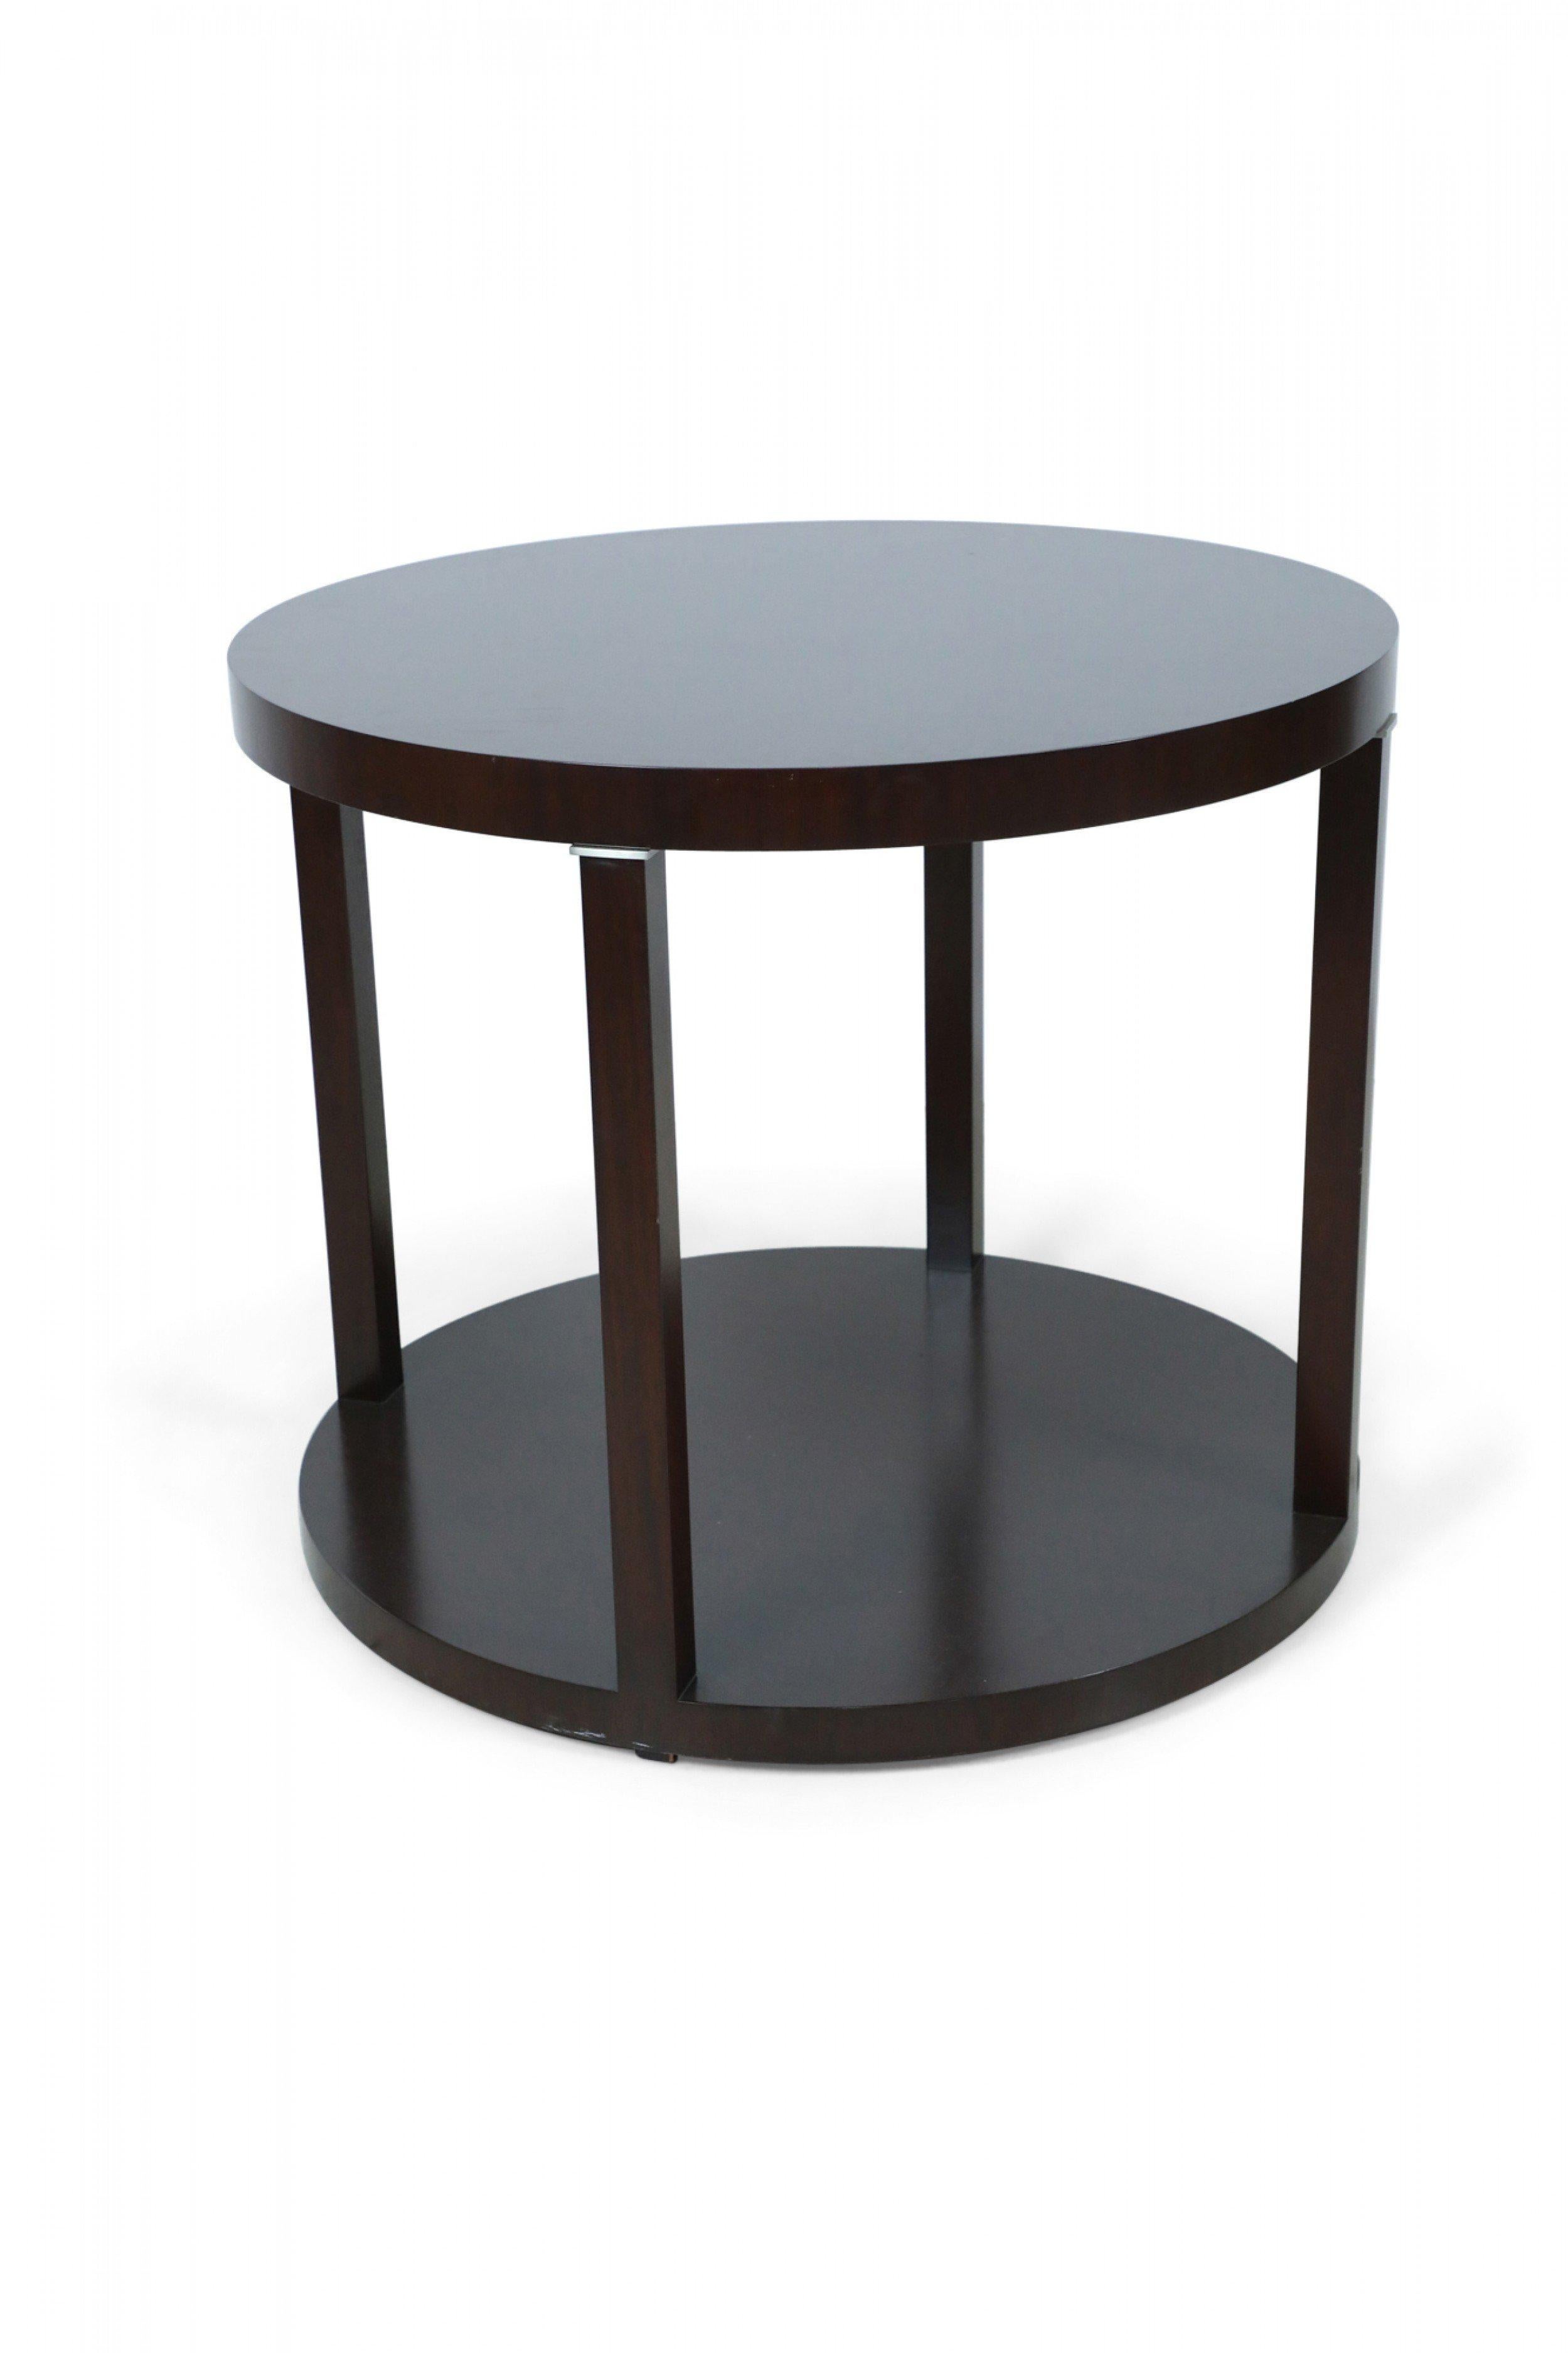 Modern Round Mahogany Center Table with Platform Base In Good Condition For Sale In New York, NY